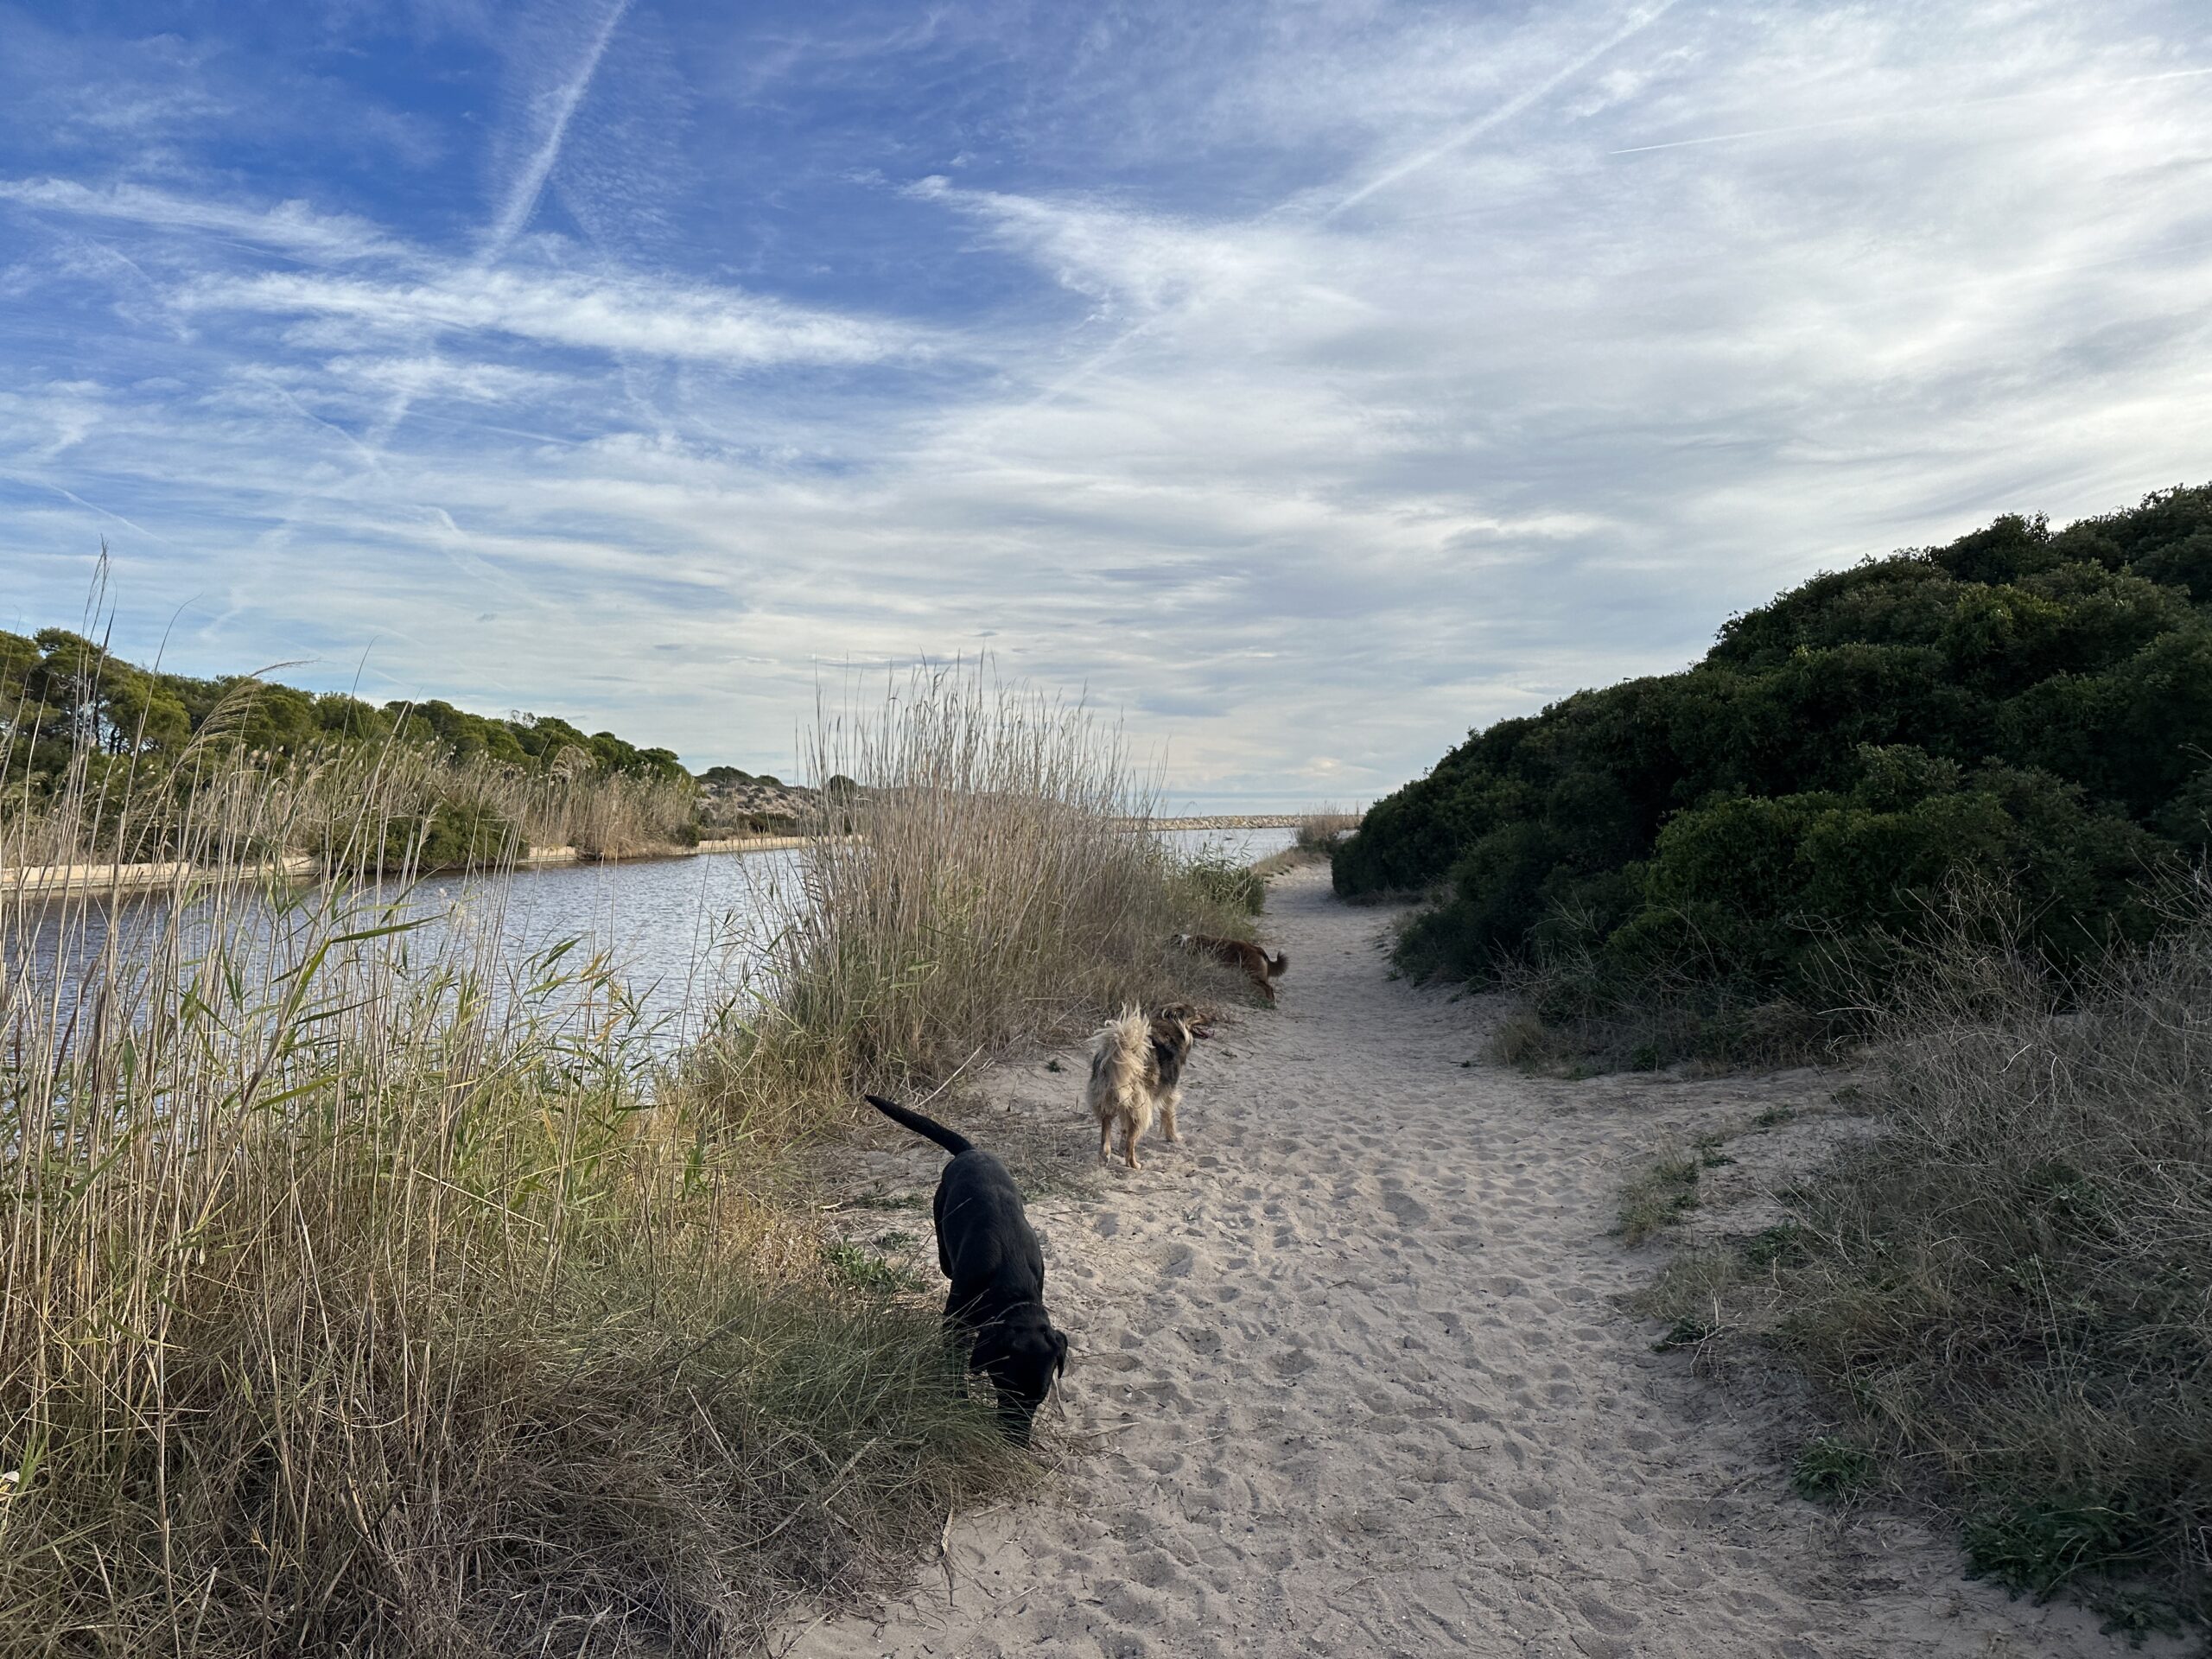 Day 3 – Dog trainer & dogs in Valencia